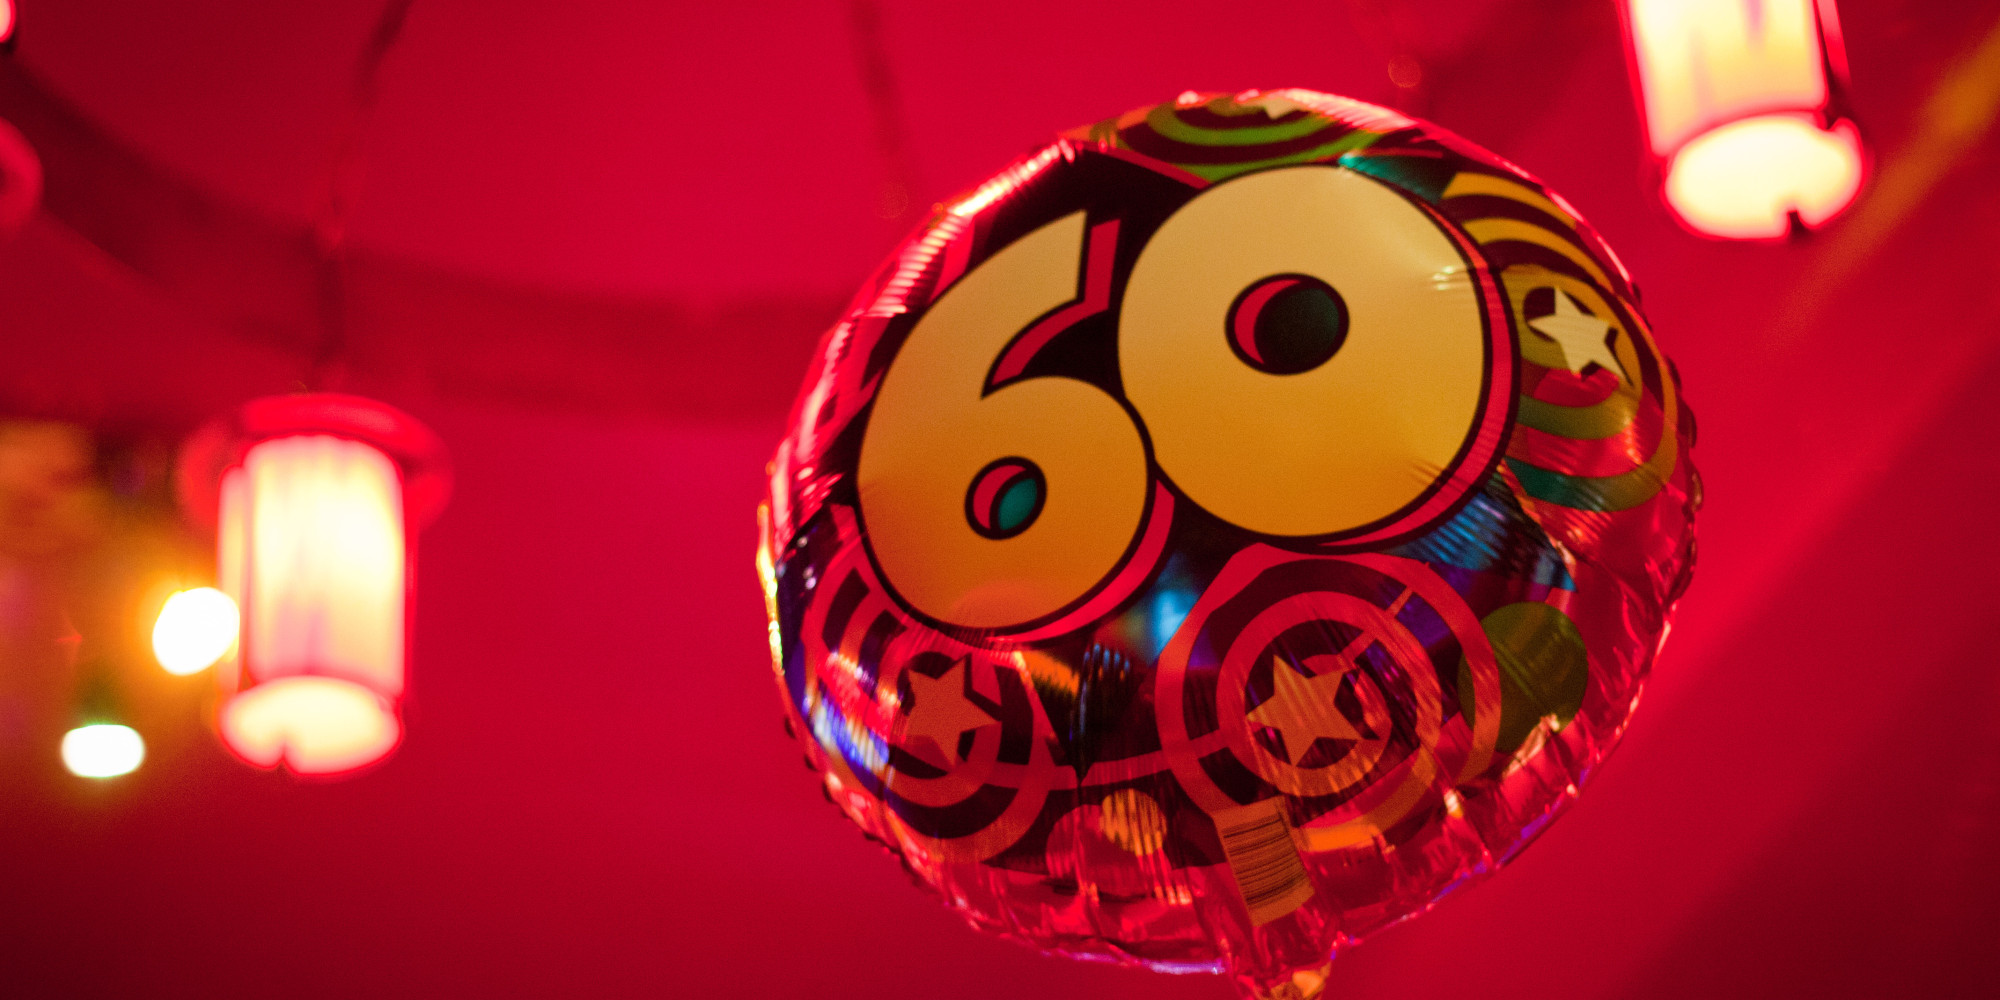 60 Perfect Reasons You Should Be Psyched About Turning 60 | HuffPost